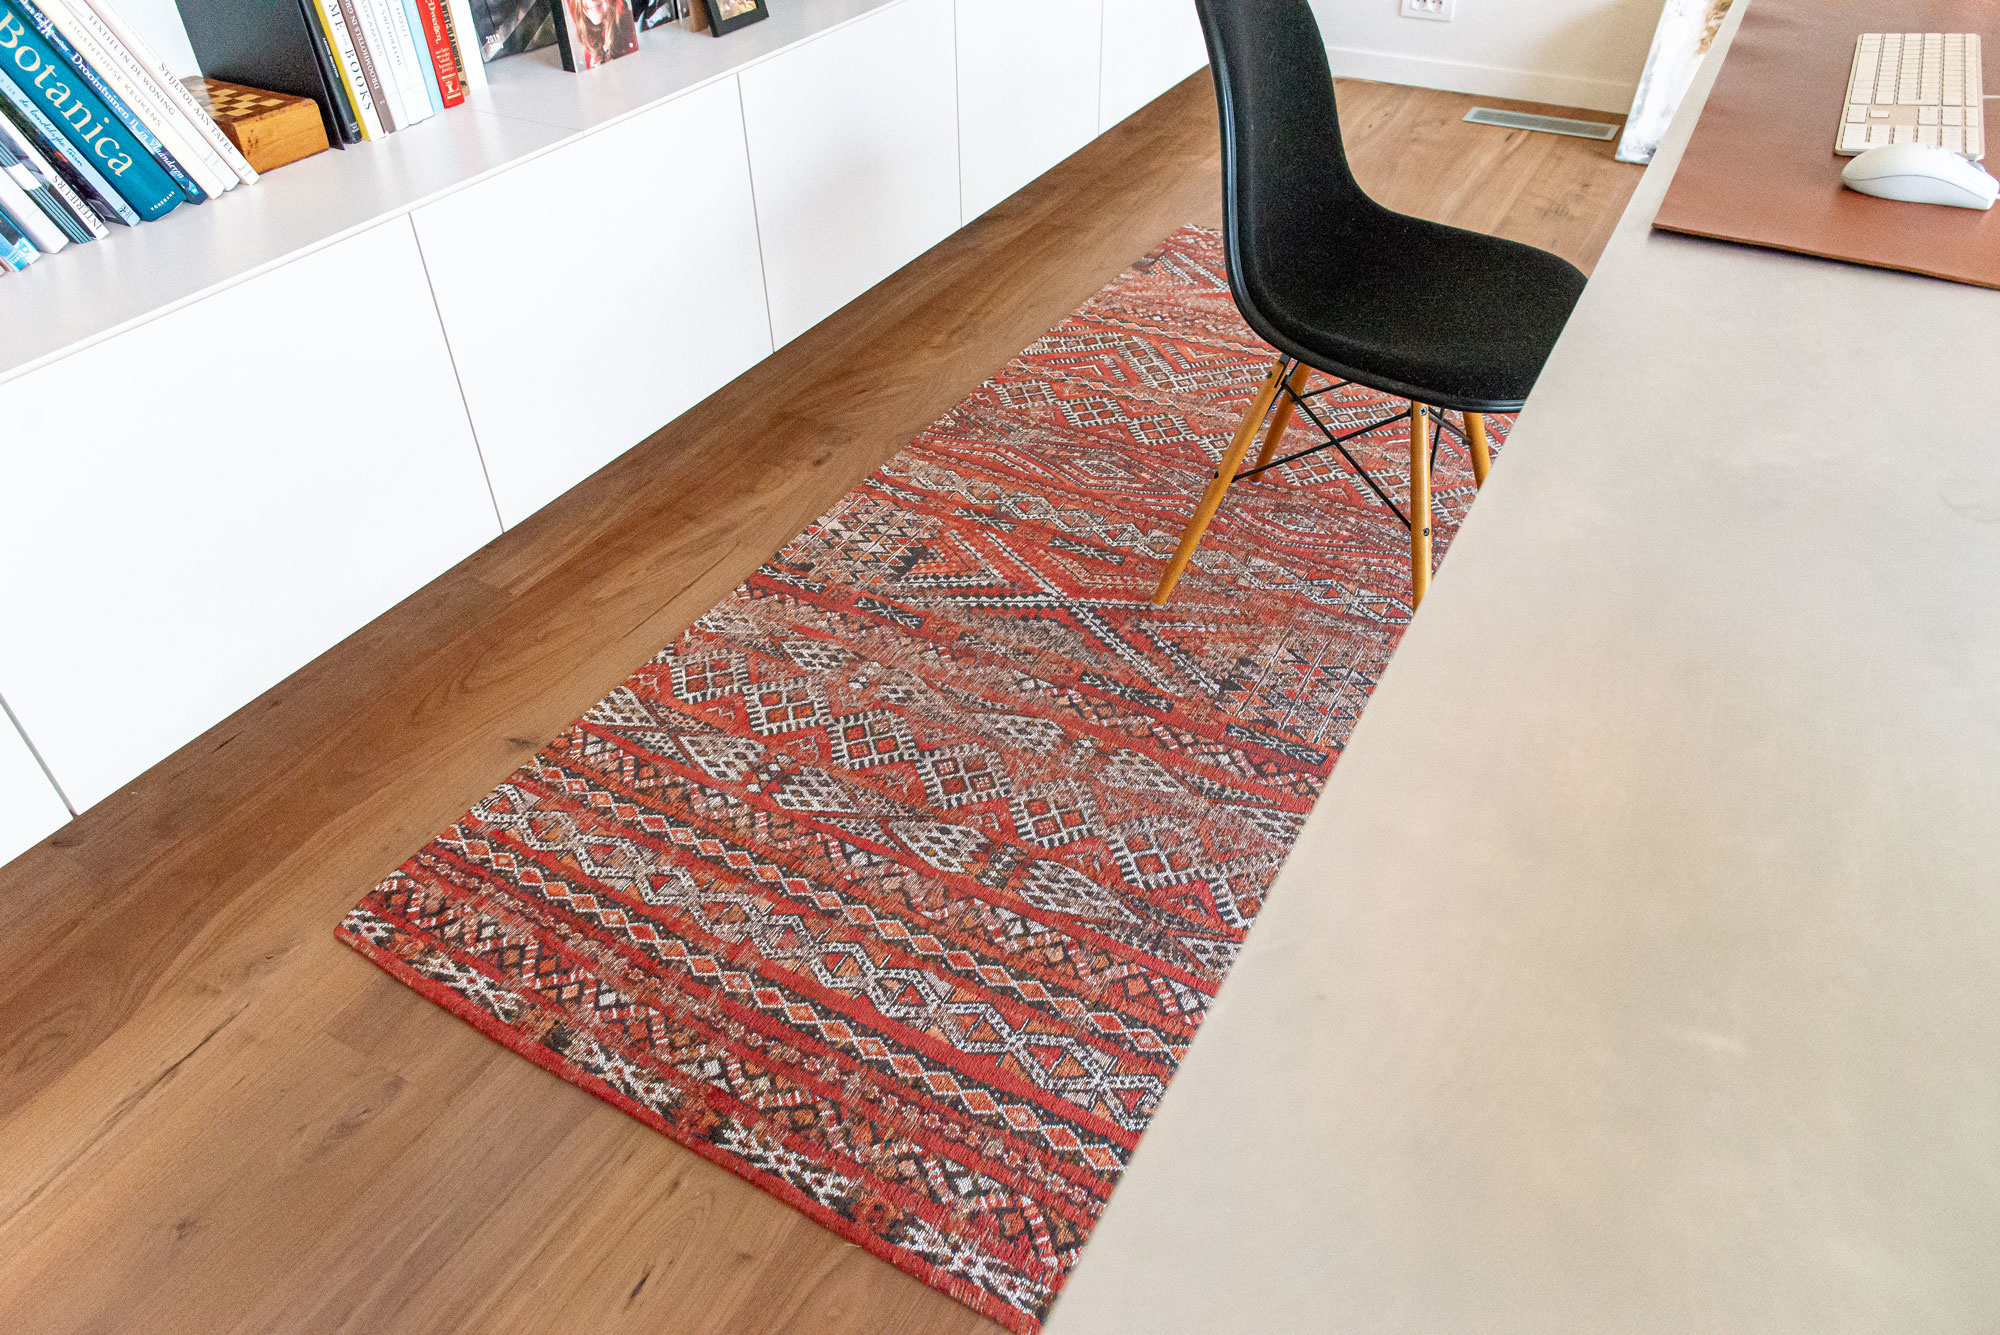 Antiquarian Flatwoven Red Rug ☞ Size: 6' 7" x 9' 2" (200 x 280 cm)